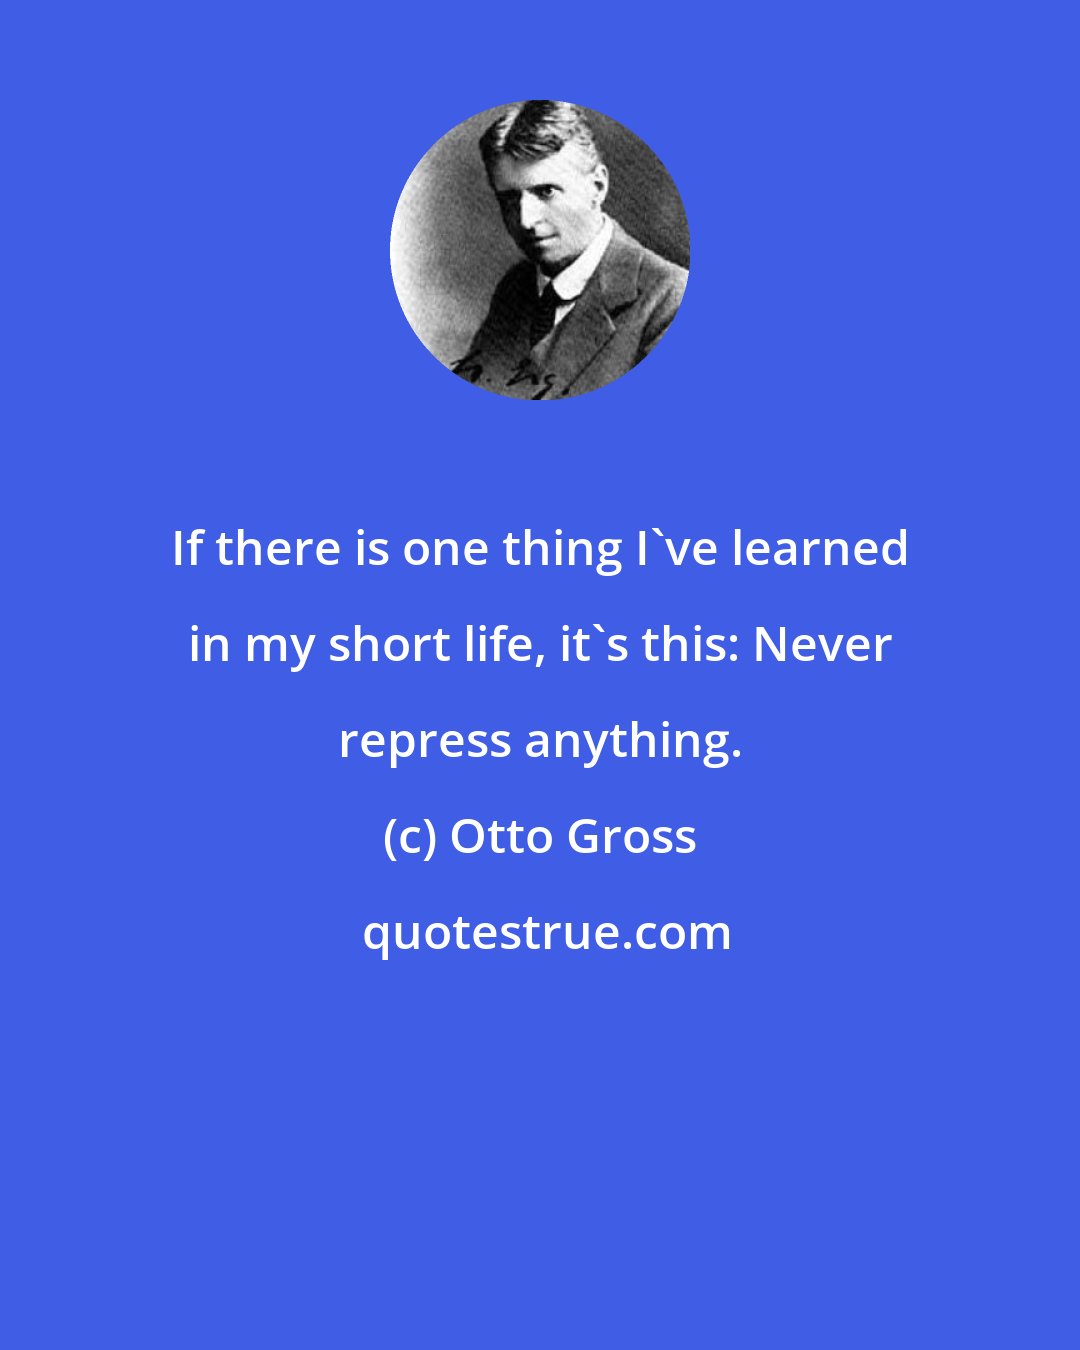 Otto Gross: If there is one thing I've learned in my short life, it's this: Never repress anything.